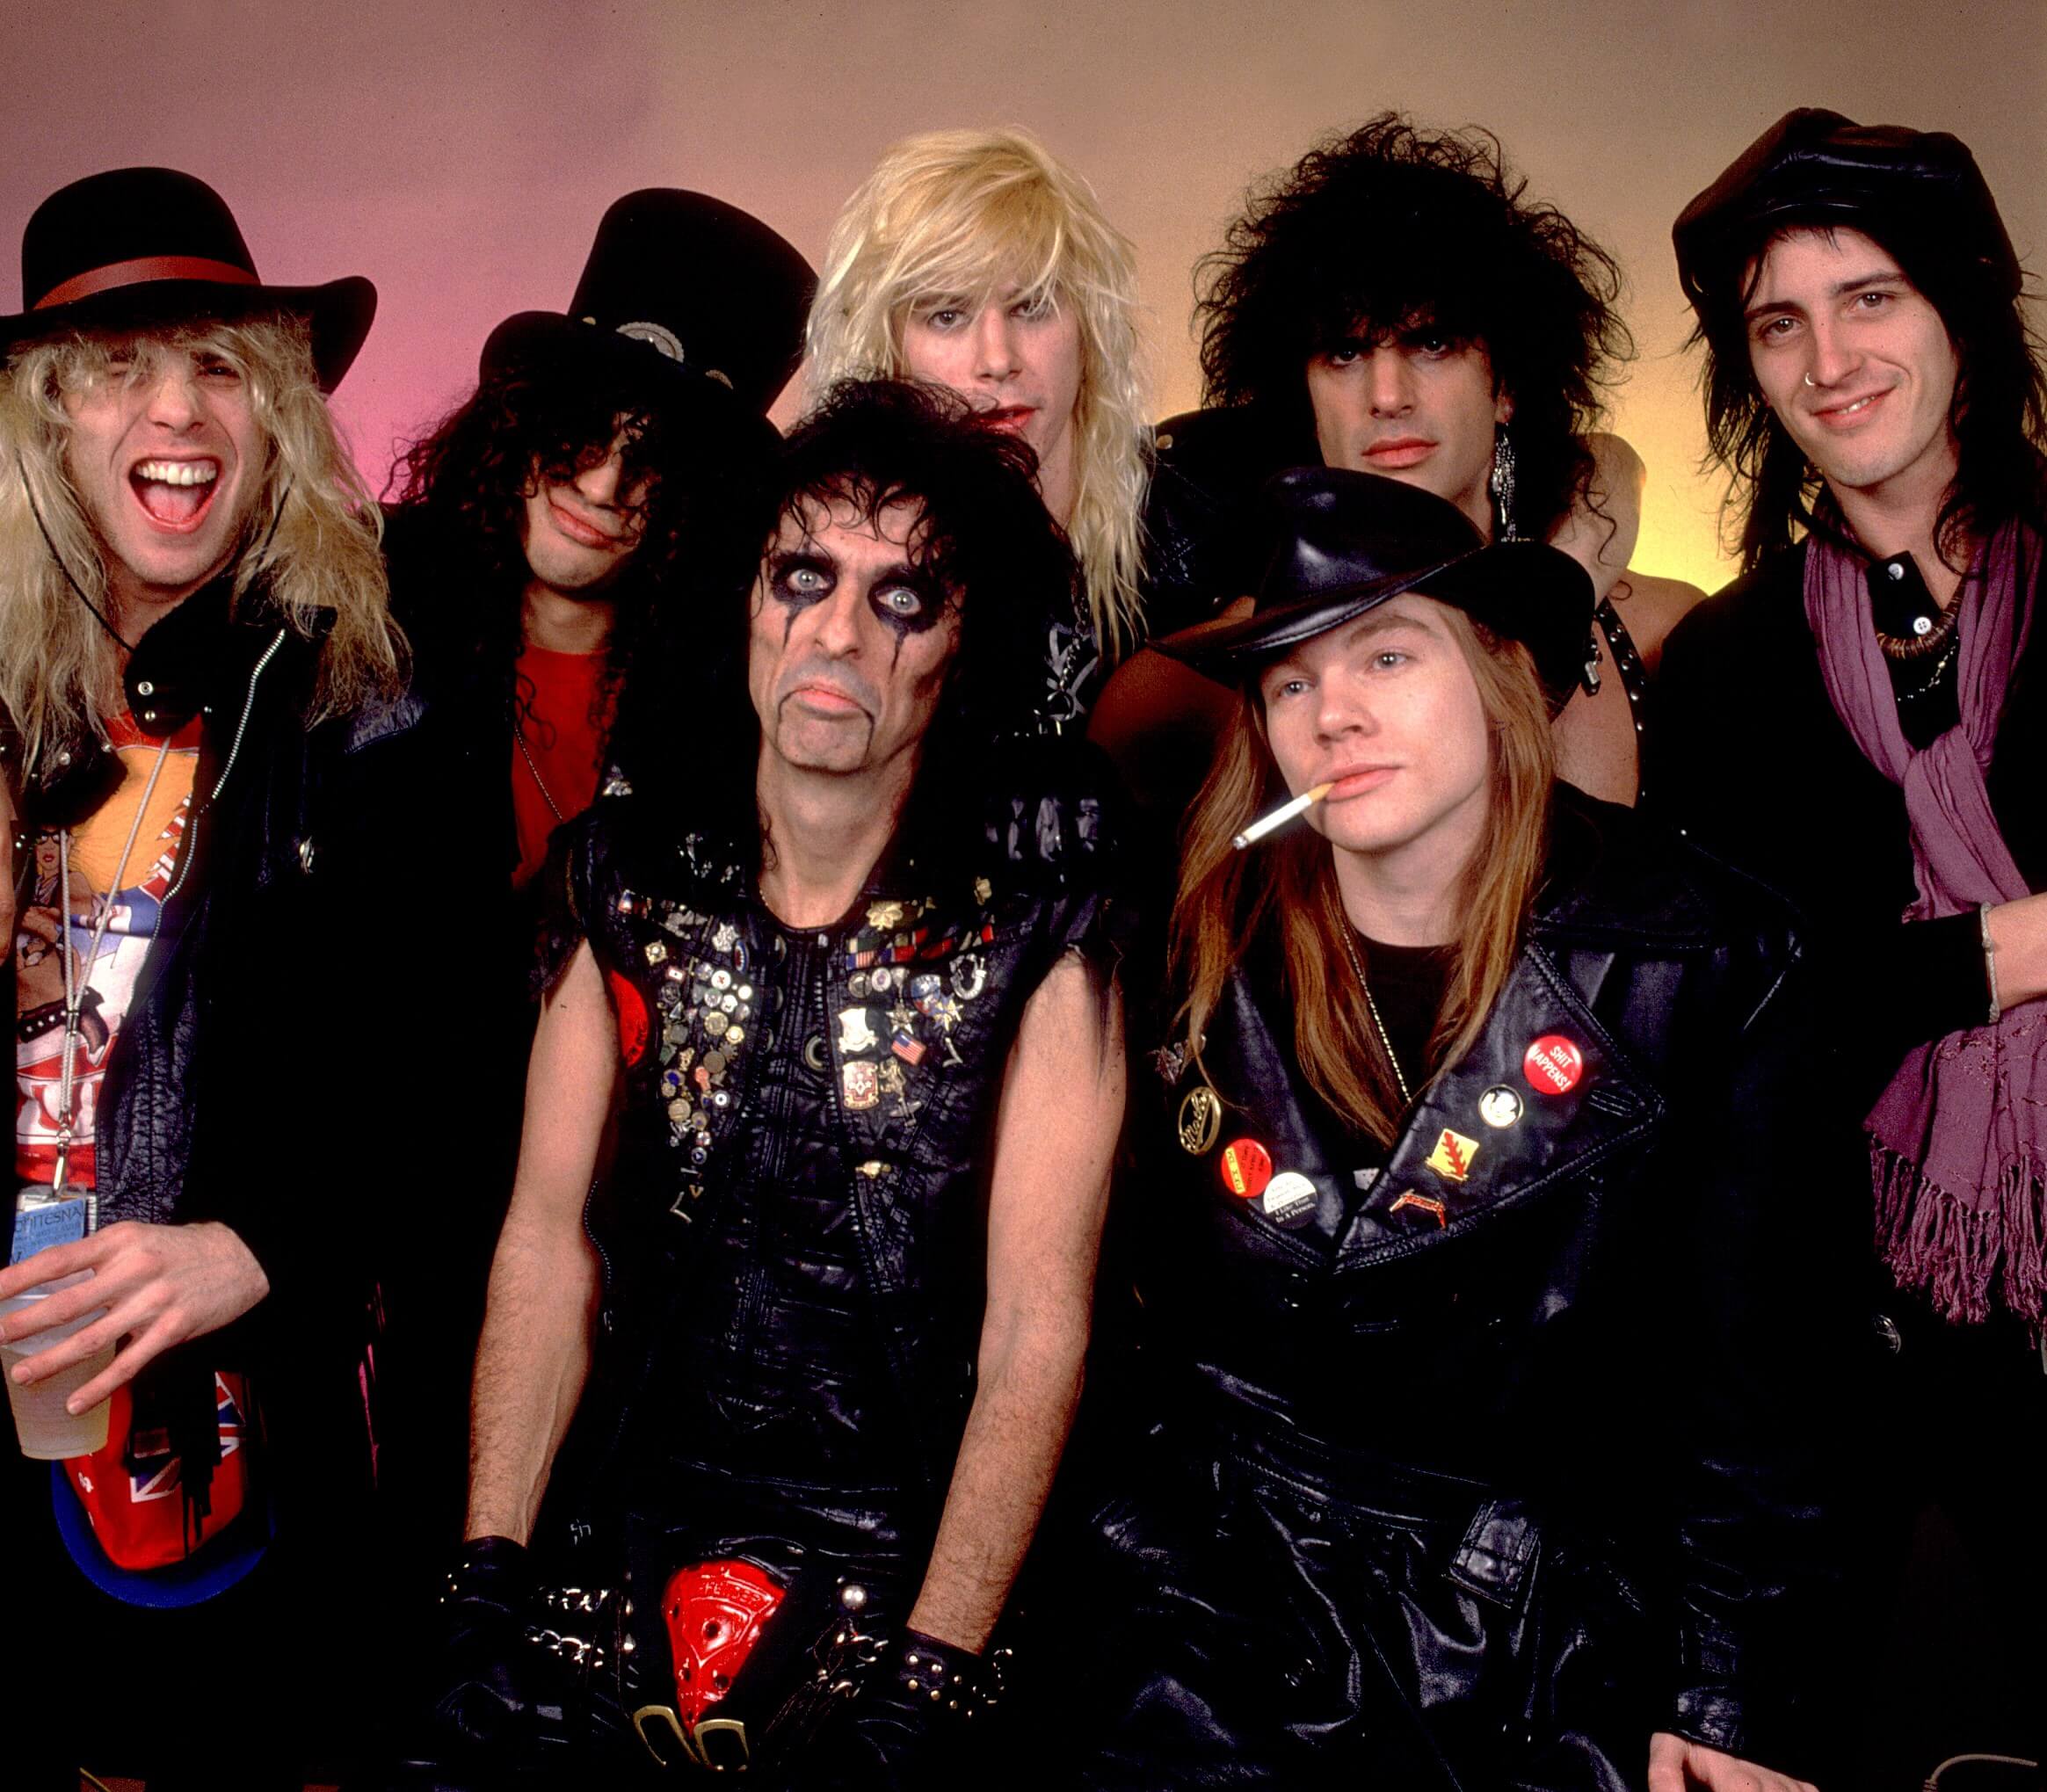 Guns N' Roses with Alice Cooper in the front row